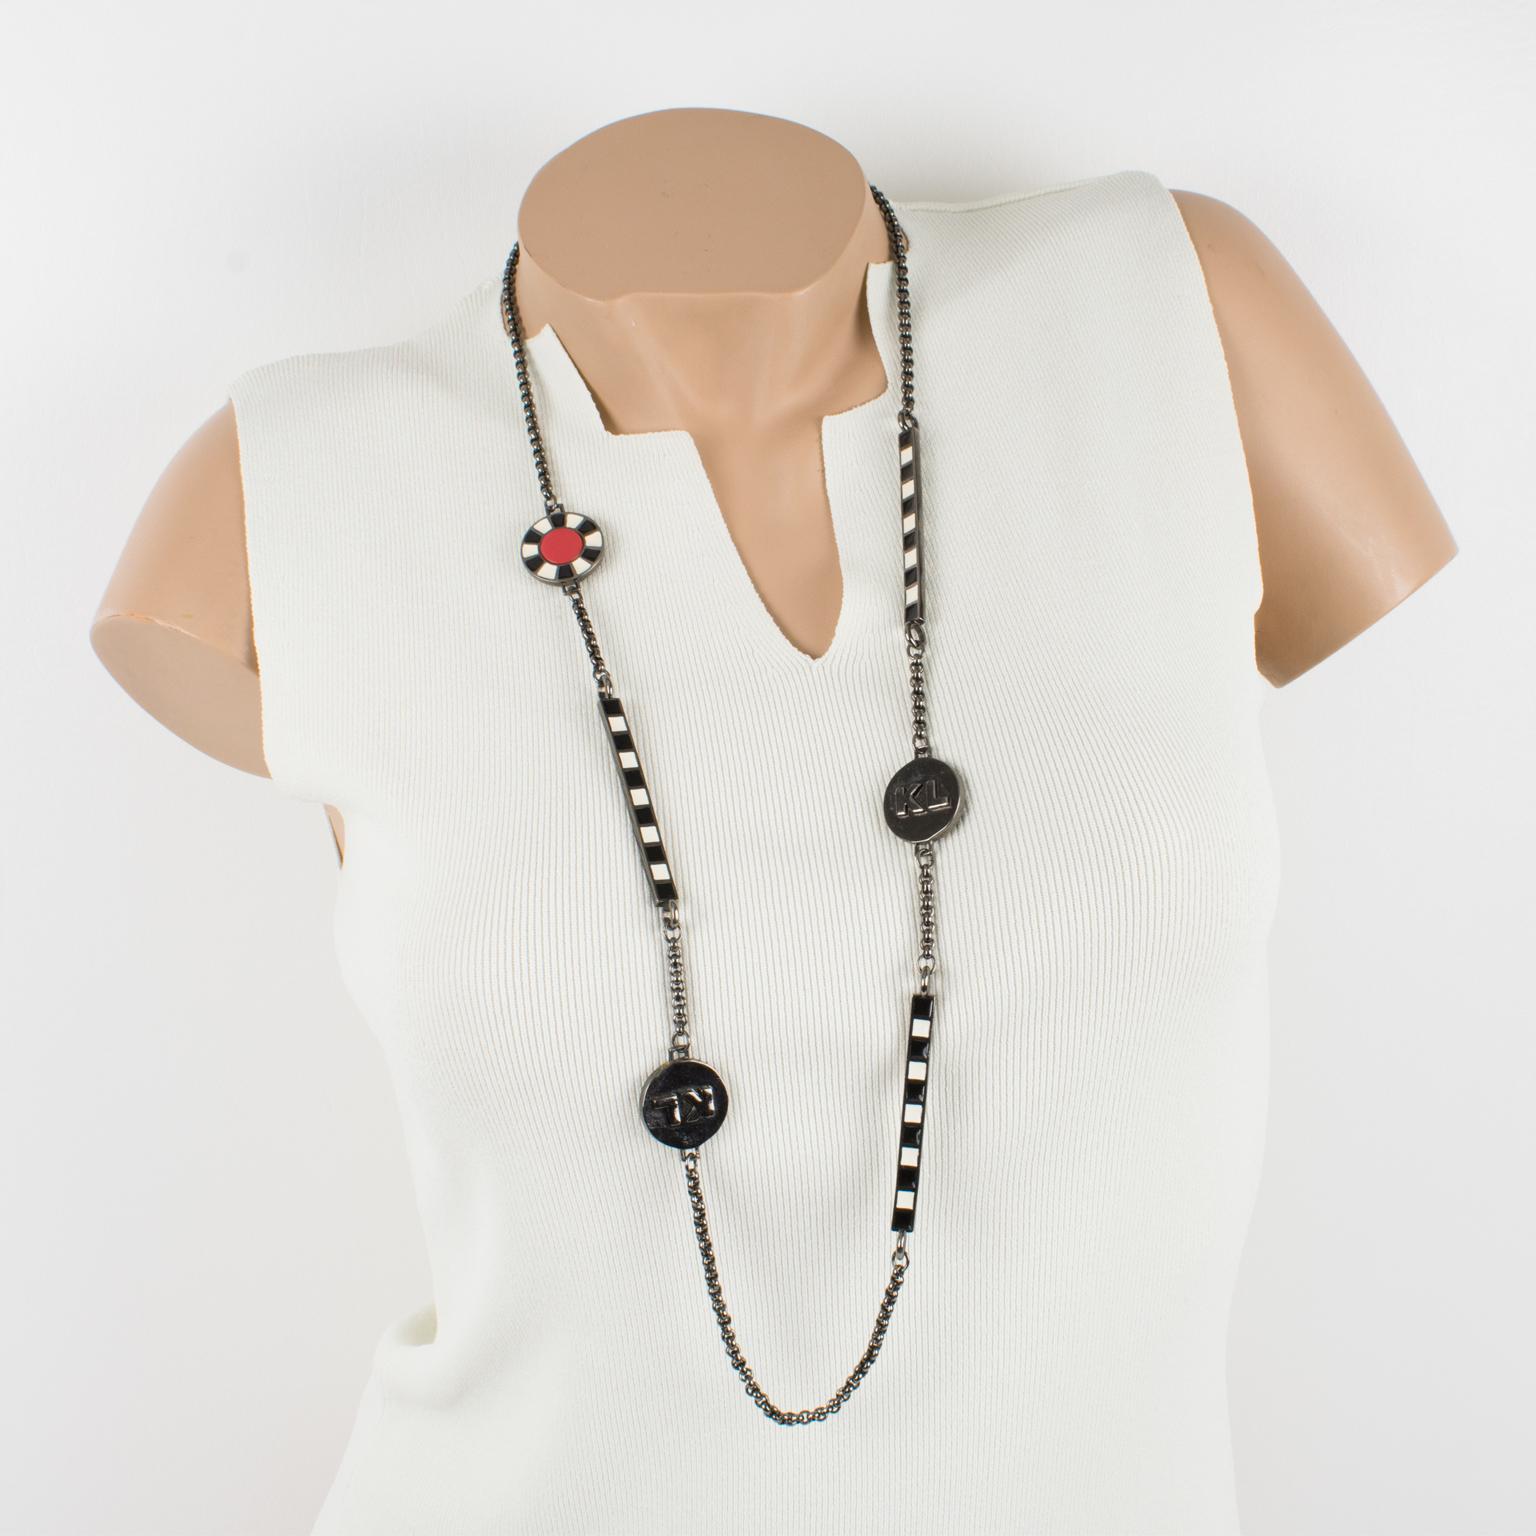 This elegant Karl Lagerfeld Paris extra-long sautoir necklace features a heavy gunmetal chain complimented with enamel bars and disks. The bars are ornate with black and white enameling on both sides, as the disks have black, white, and red